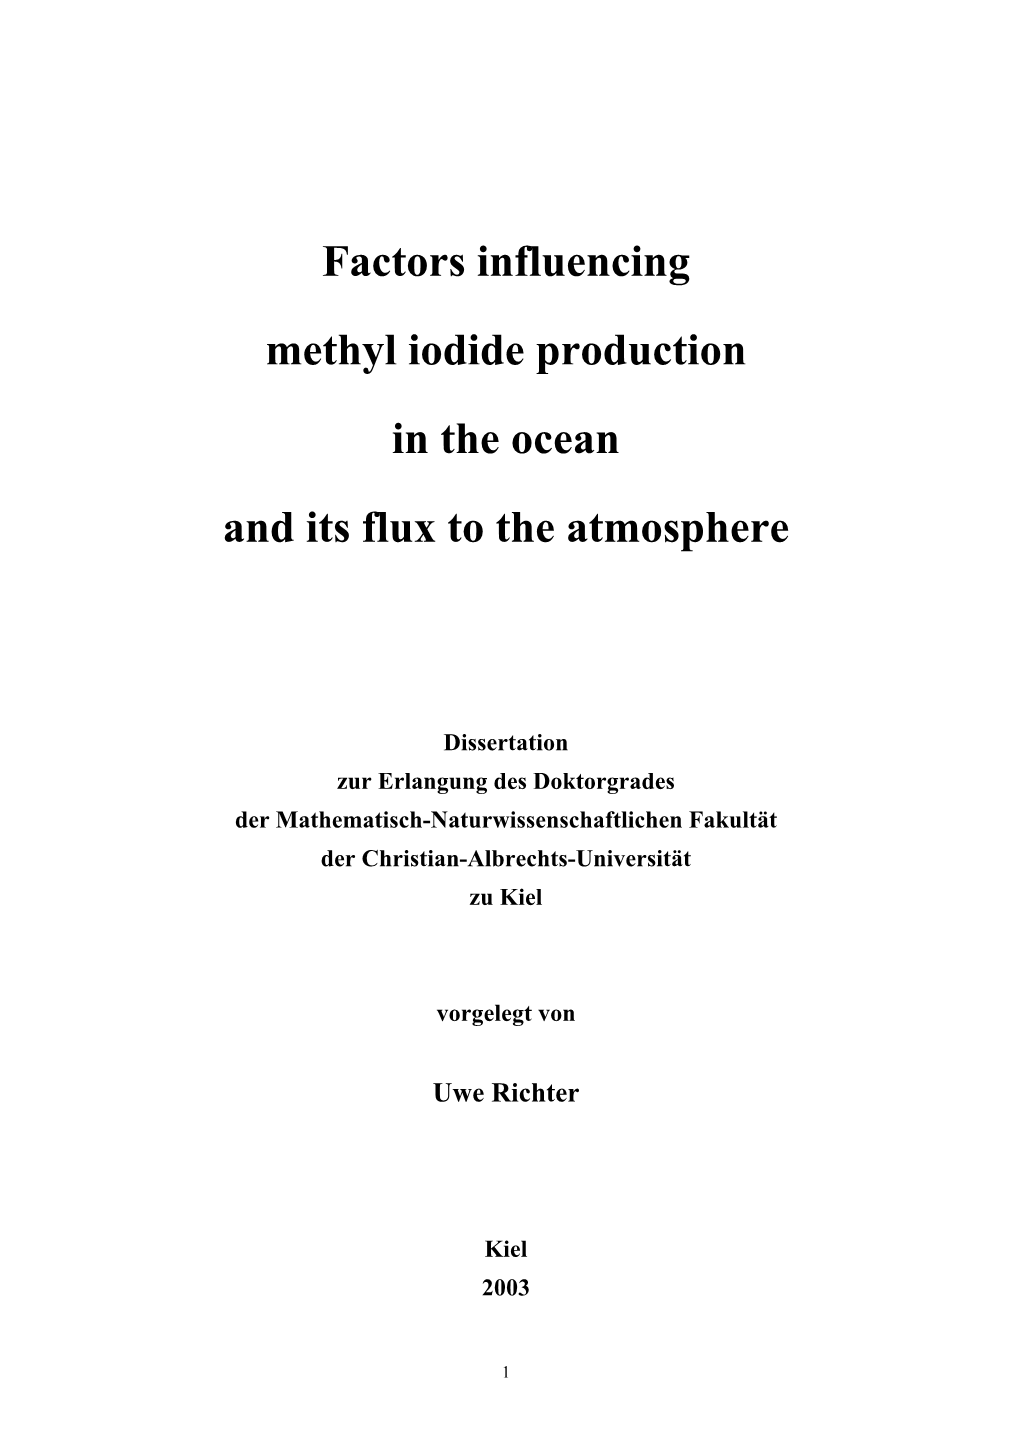 Factors Influencing Methyl Iodide Production in the Ocean and Its Flux to the Atmosphere